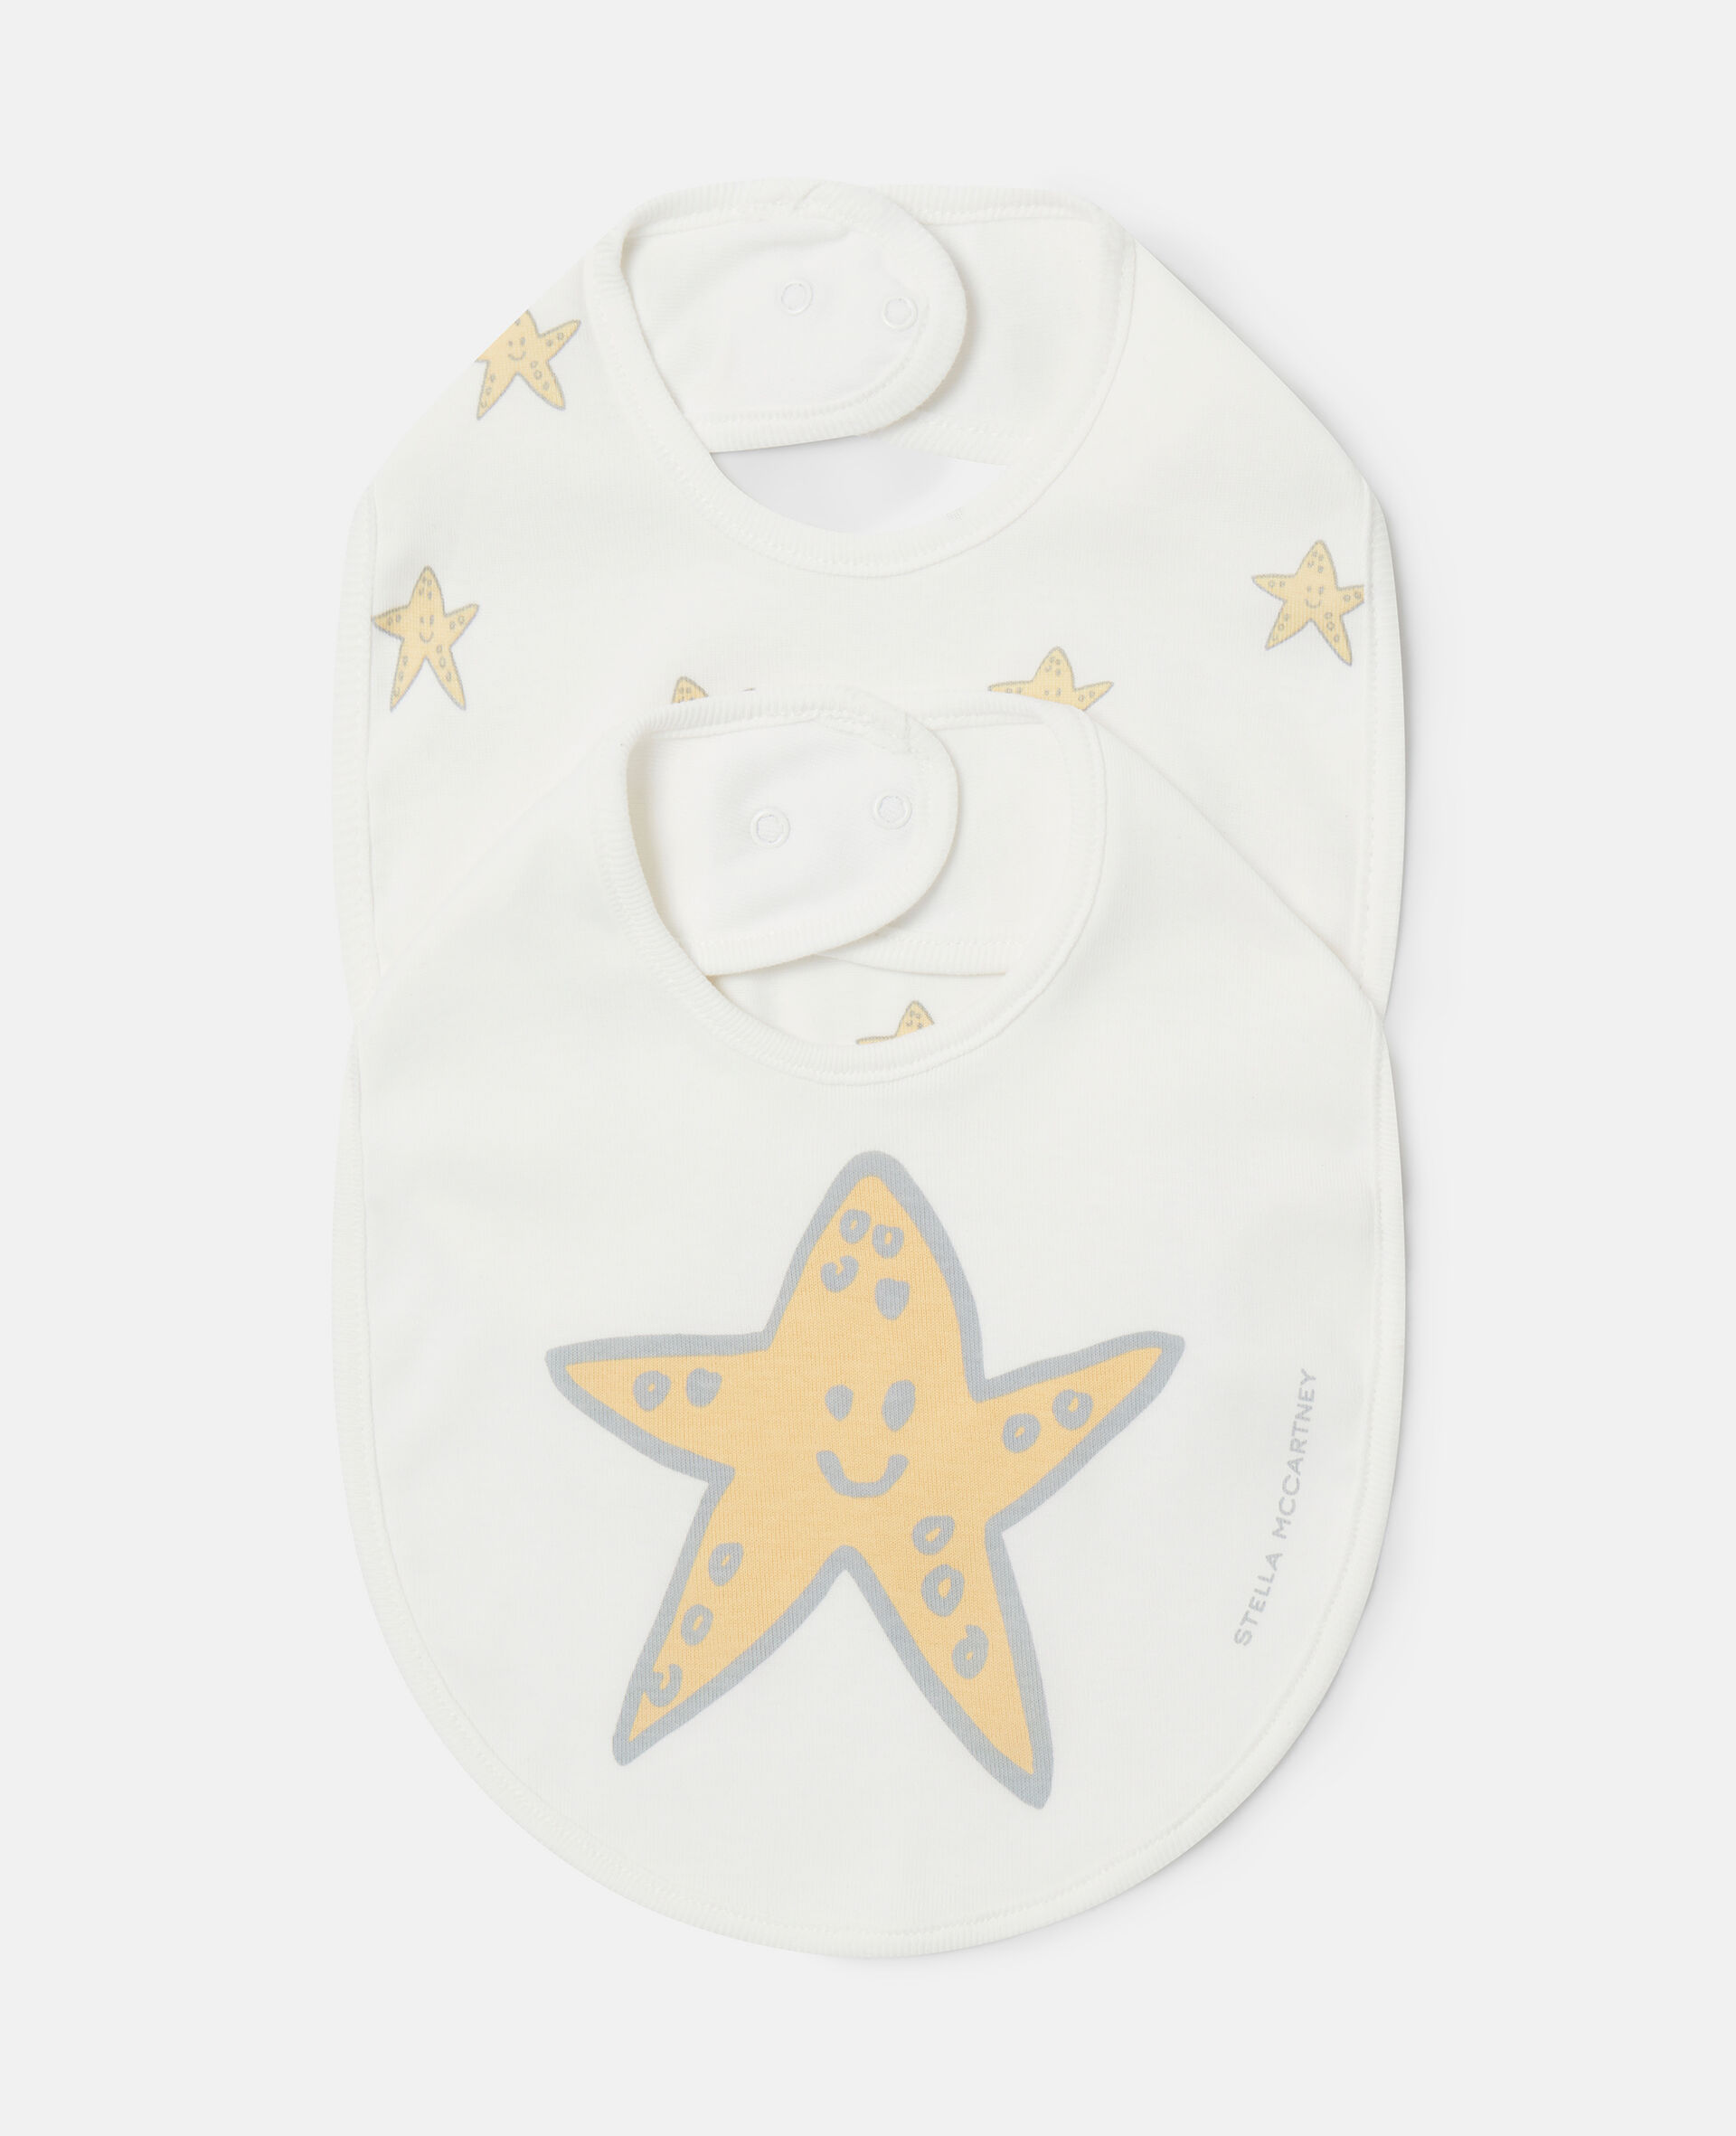 2 Pack of Smiling Stella Star Print Bibs-Multicolour-large image number 0